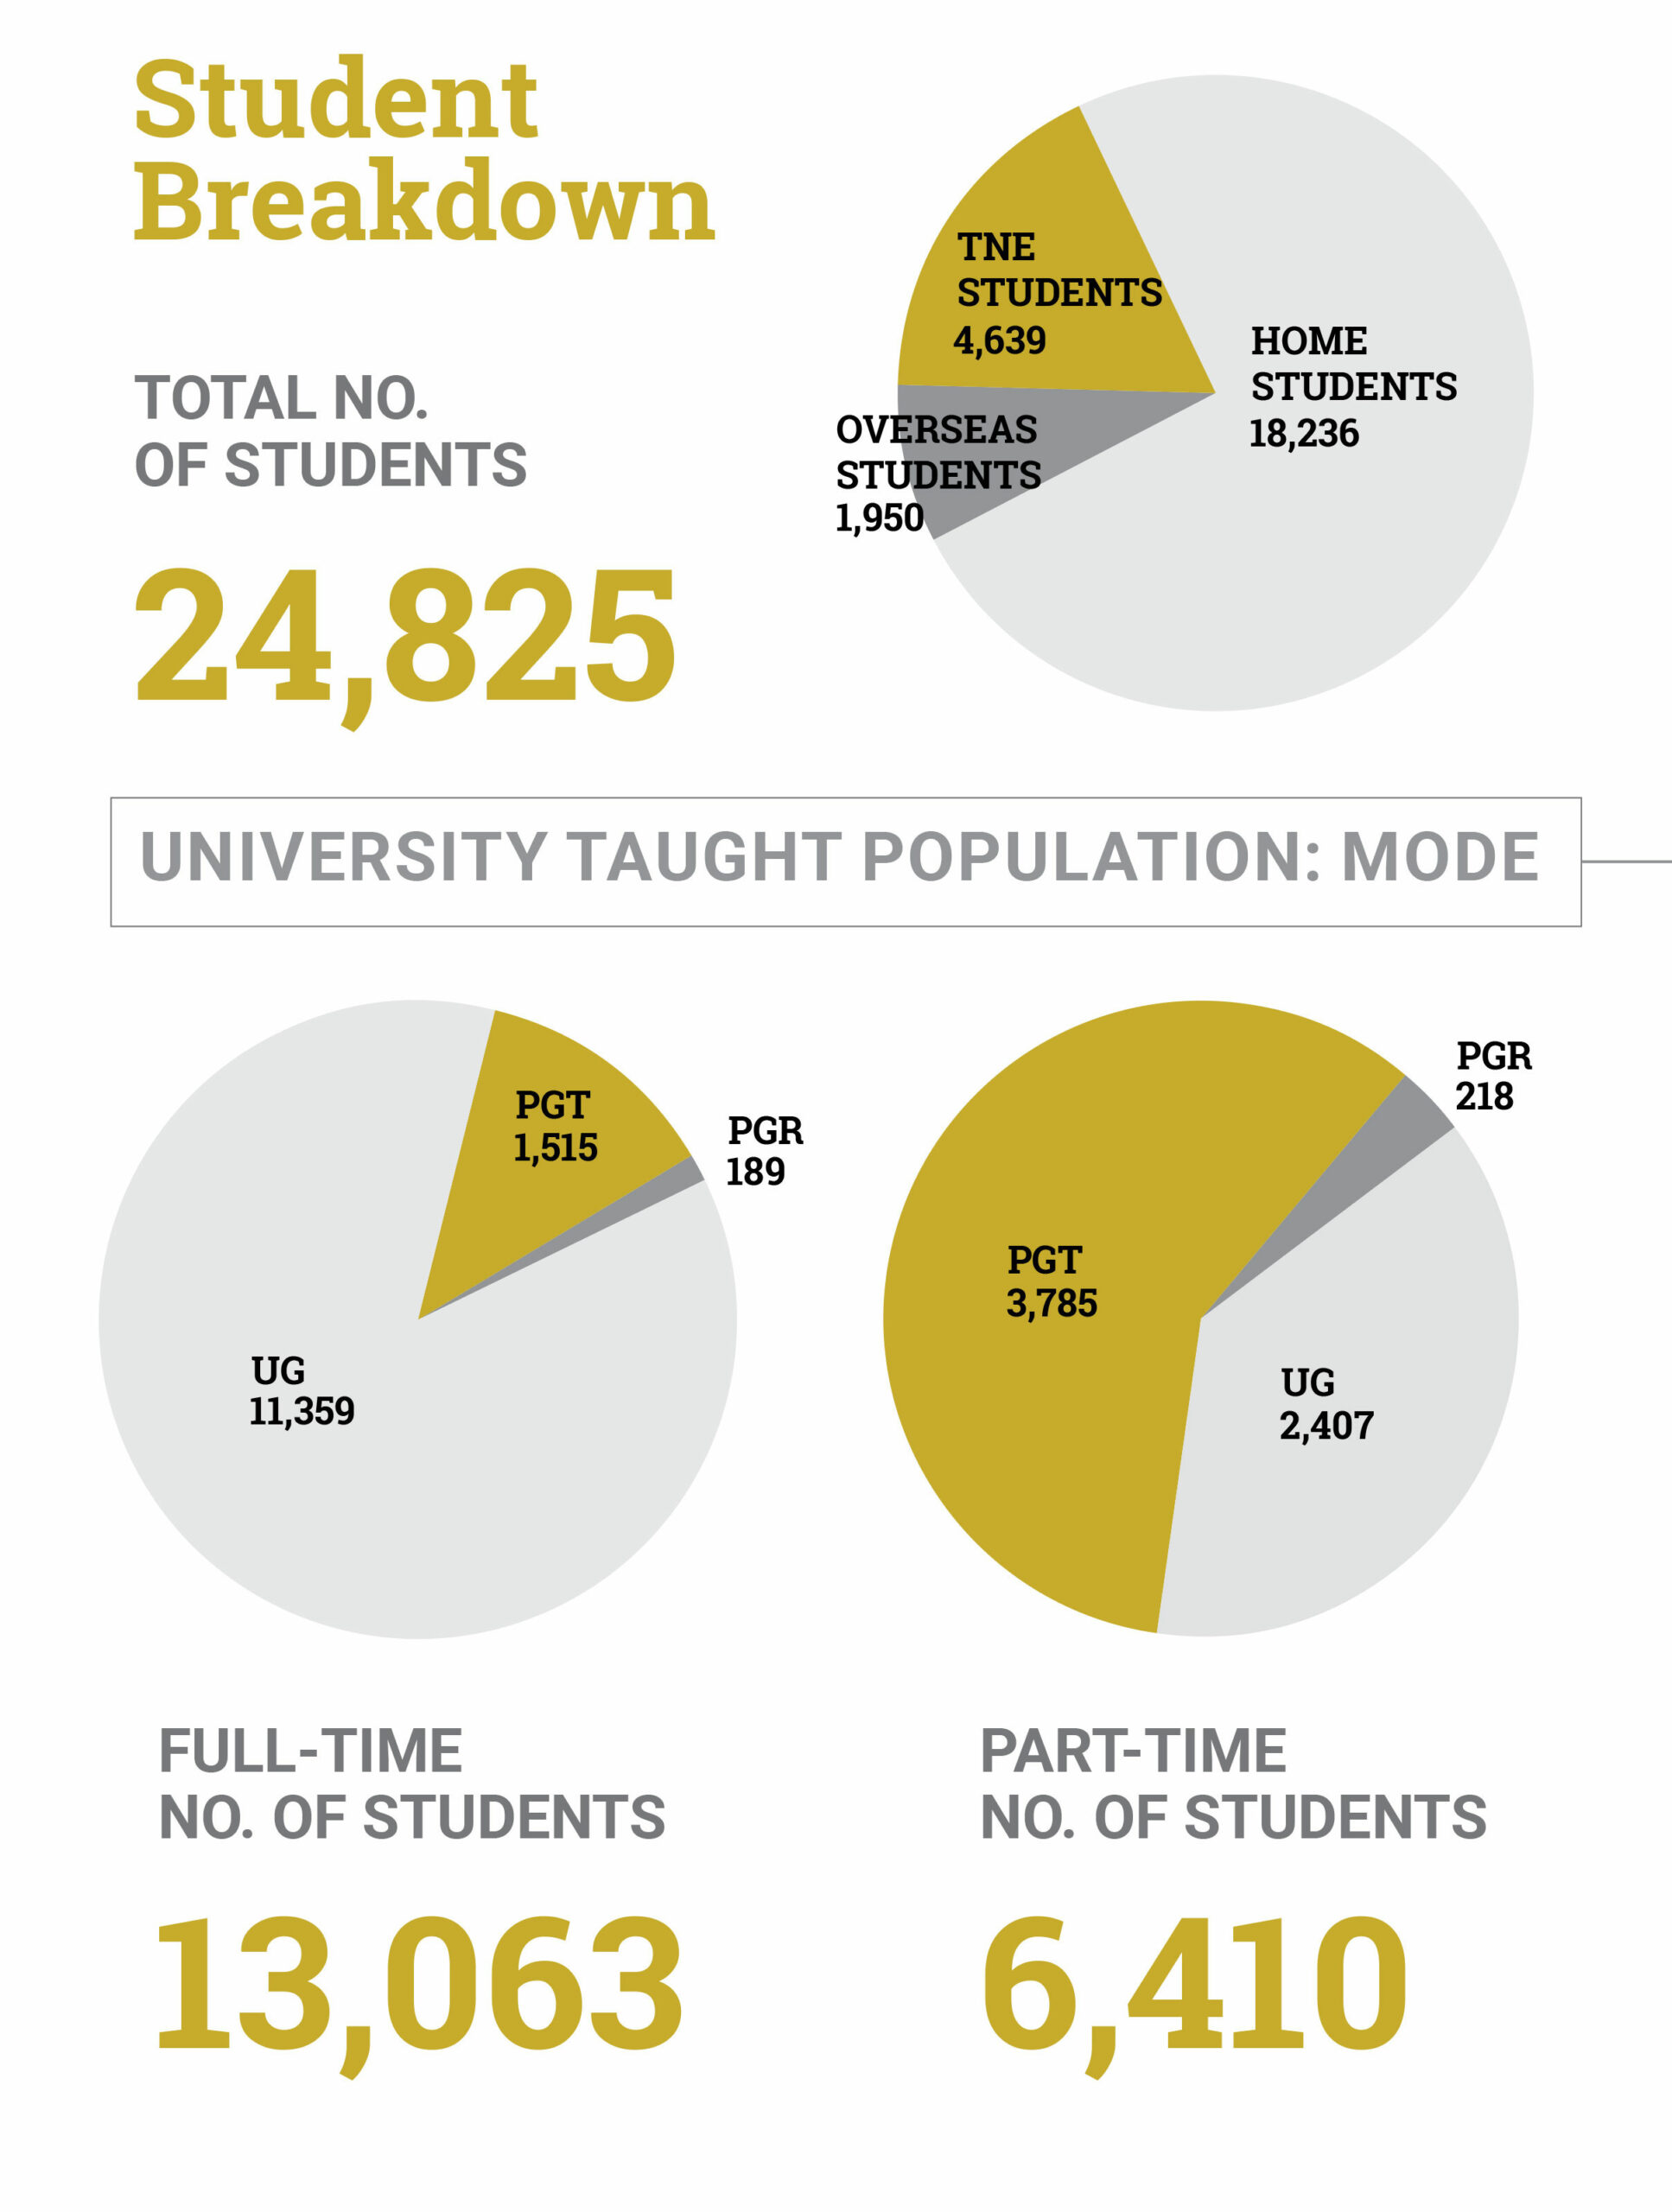 Student Breakdown: TOTAL NO. OF STUDENTS: 24,825 FULL-TIME NO. OF STUDENTS: 13,063 PART-TIME NO. OF STUDENTS: 6,410